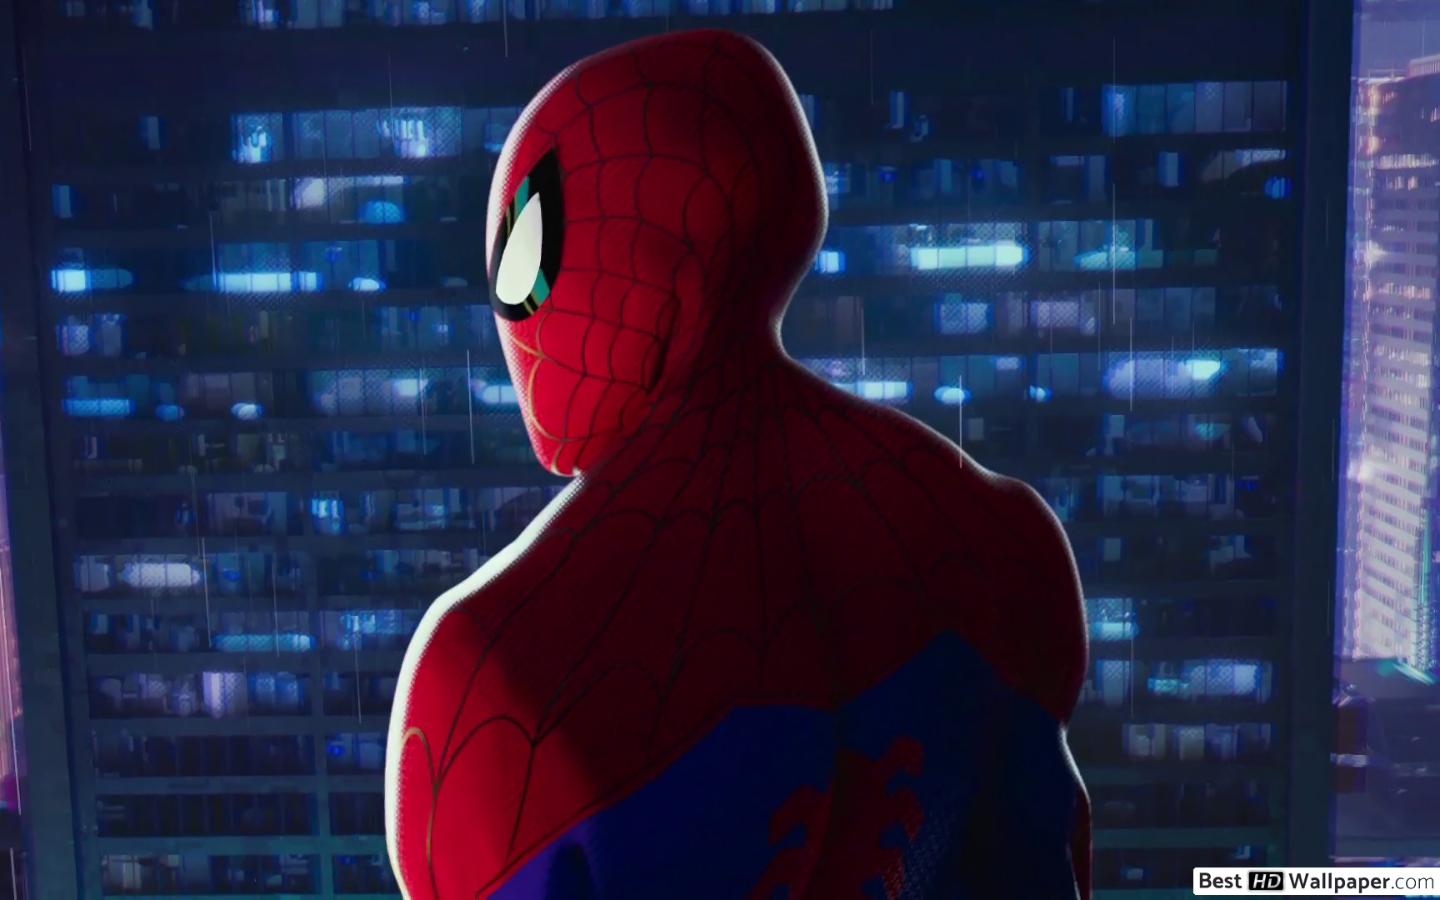 Spiderman Wallpaper Hd, Cool Wallpaper Hd, Images Of - Spider Man Into The Spider Verse Spiderman - HD Wallpaper 